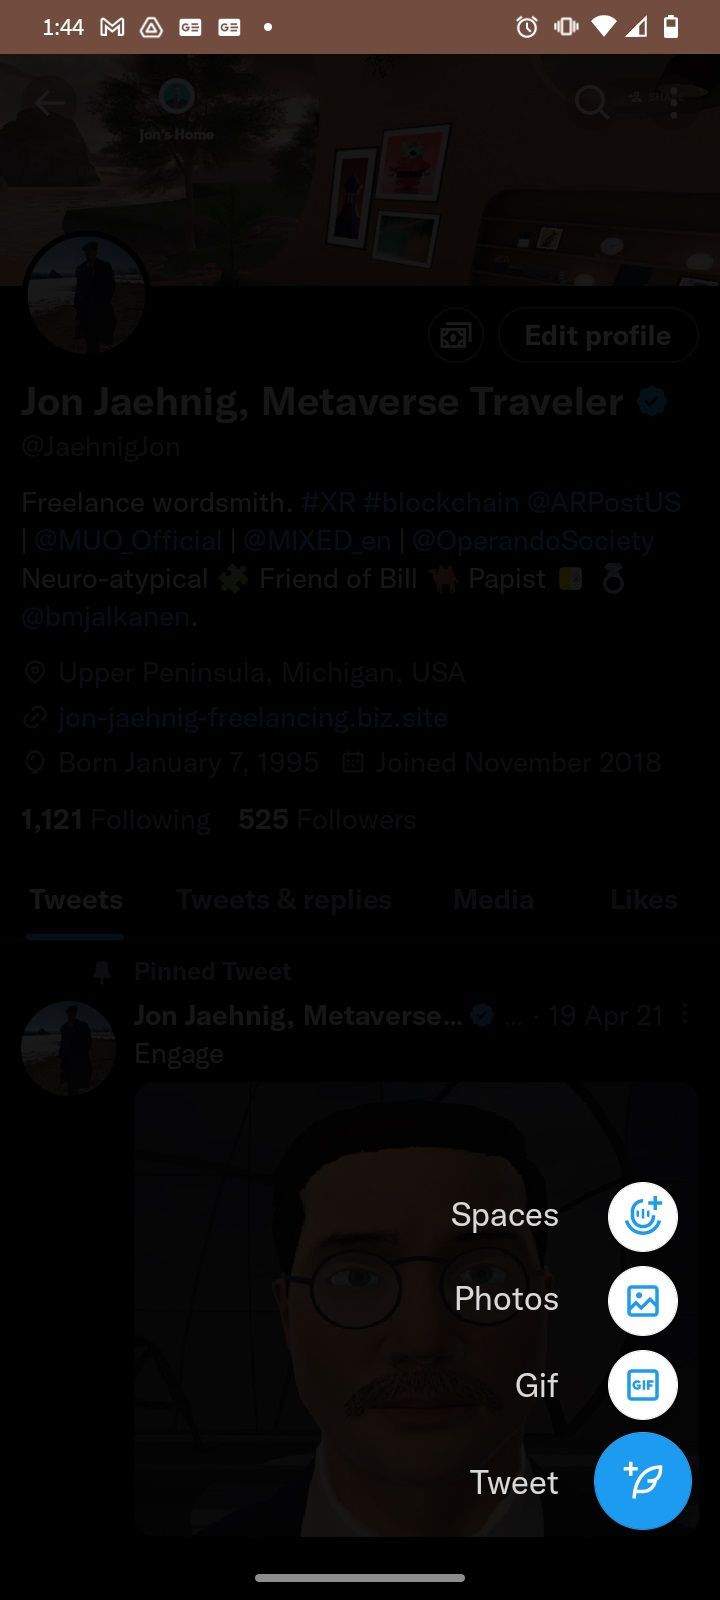 Select specific media to tweet in the mobile app